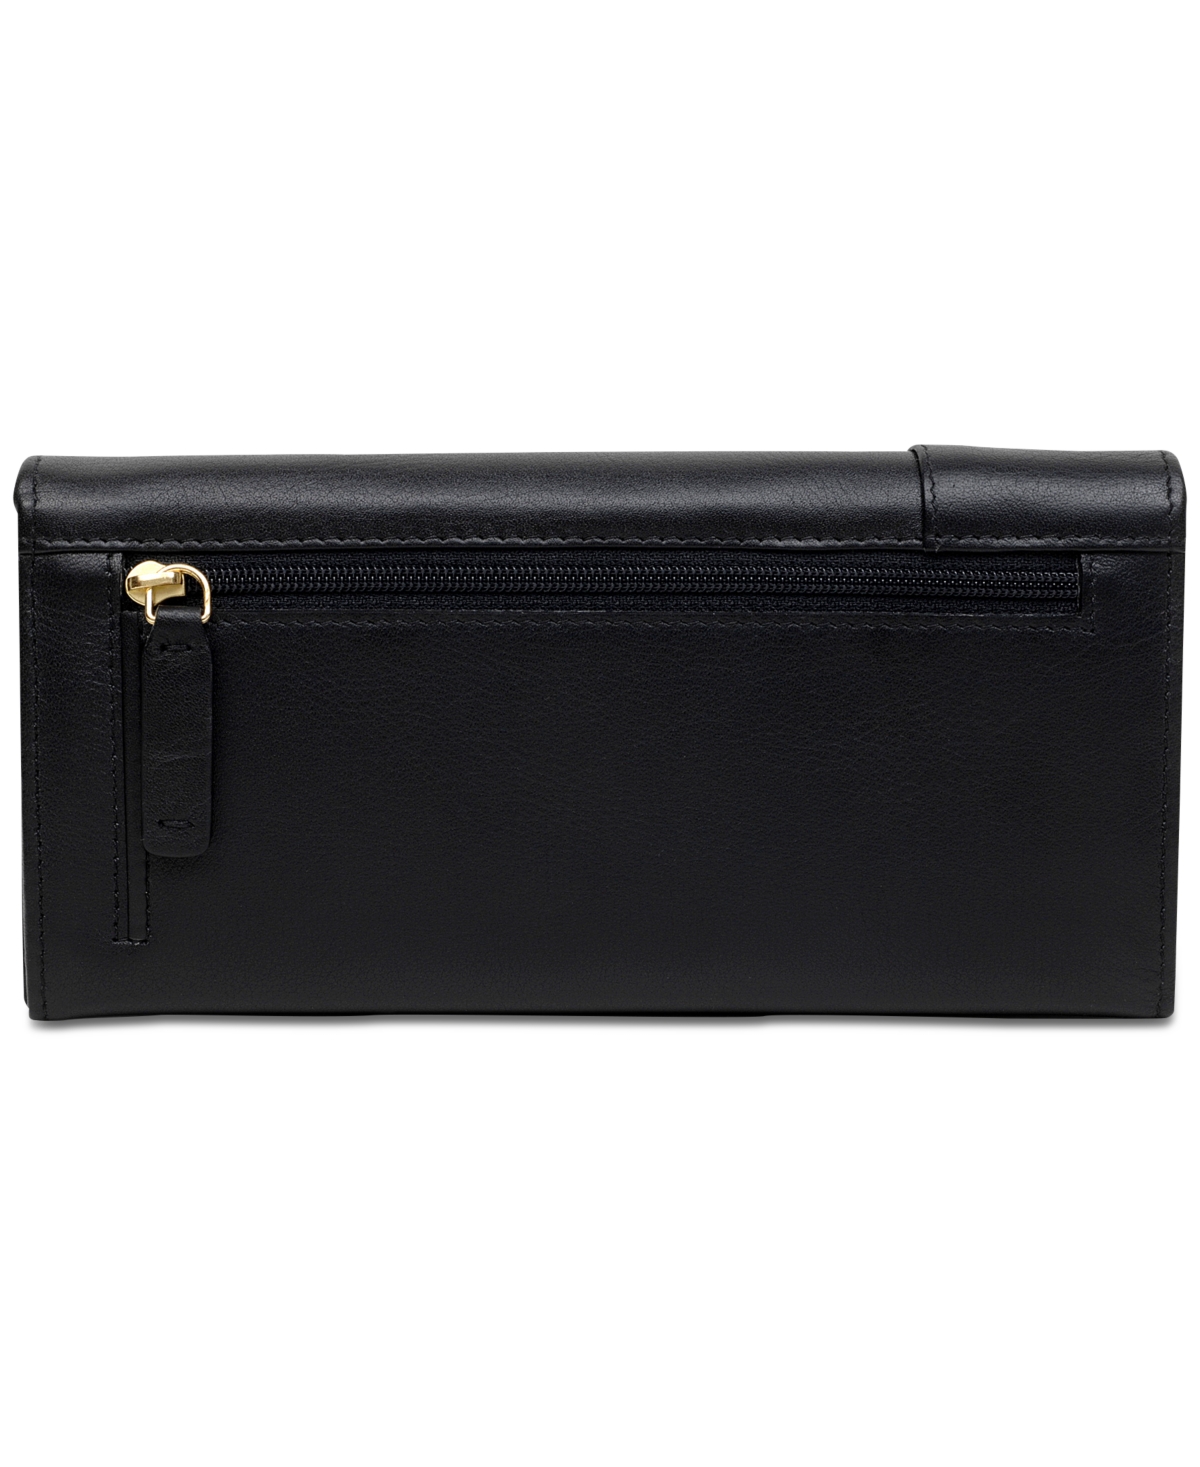 Shop Radley London Large Flapover Leather Wallet In Black,gold